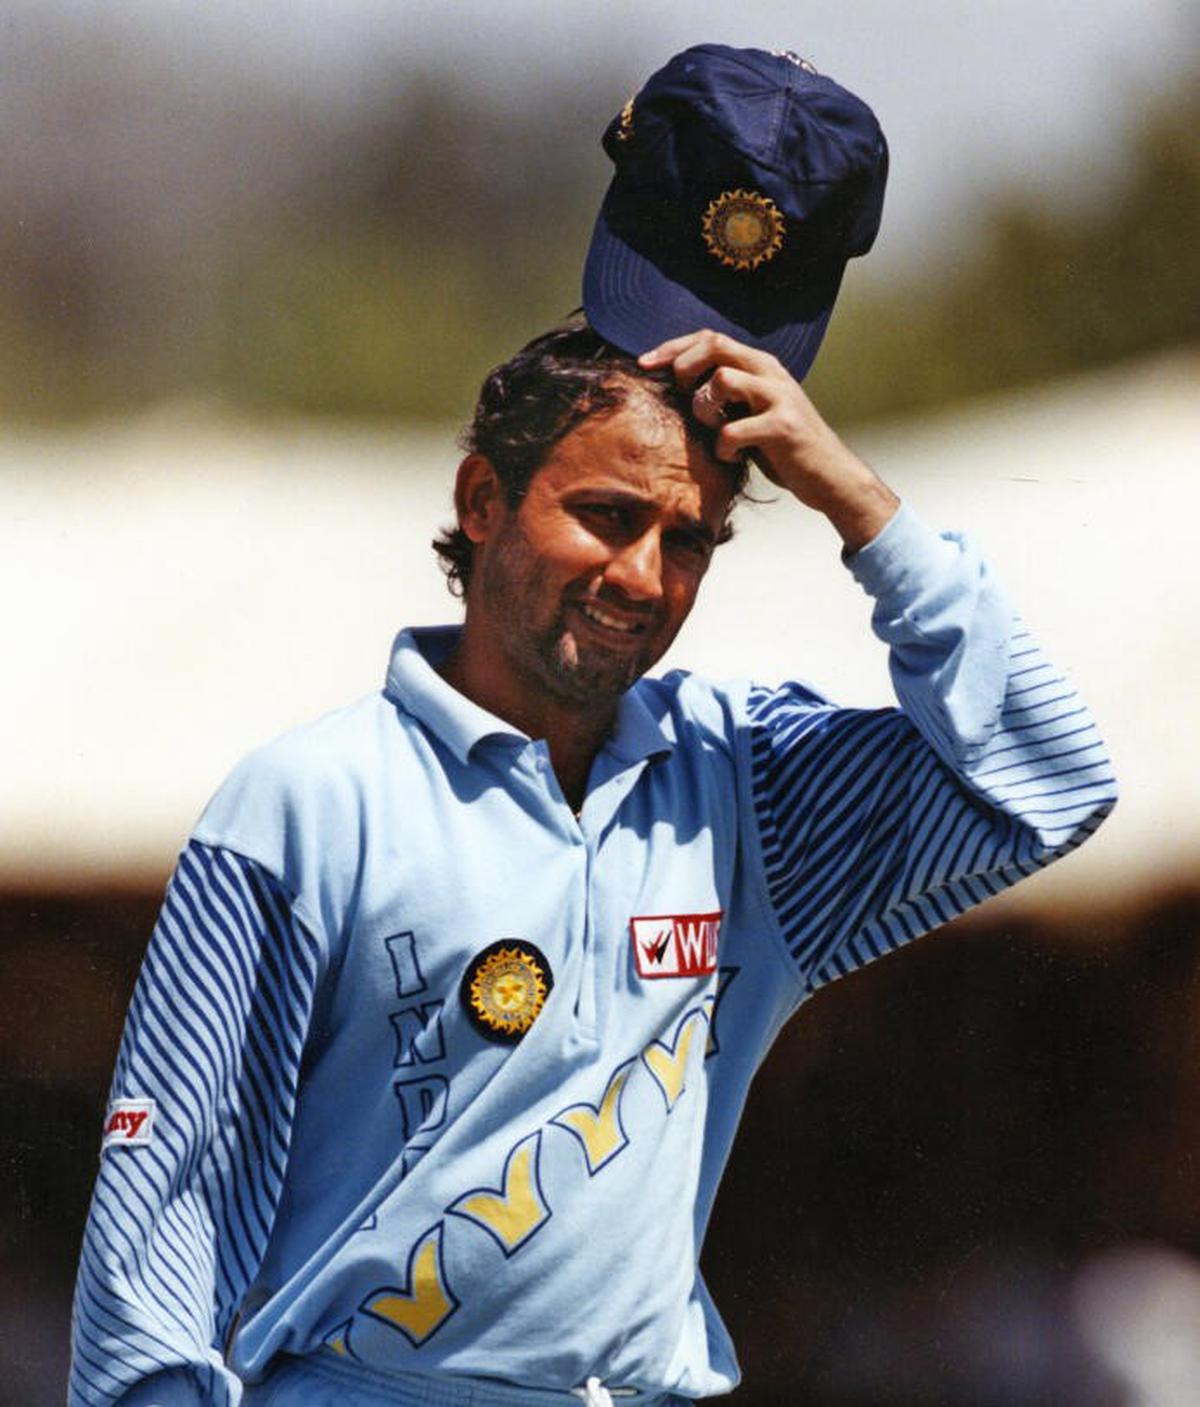 Nayan Mongia of Indian cricket team wicket-keeper snapped during the Pepsi Cup Triangular Series One Day International (ODI) Cricket Tournament match between India and Pakistan Sawai Mansingh Stadium, Jaipur on March 24, 1999.